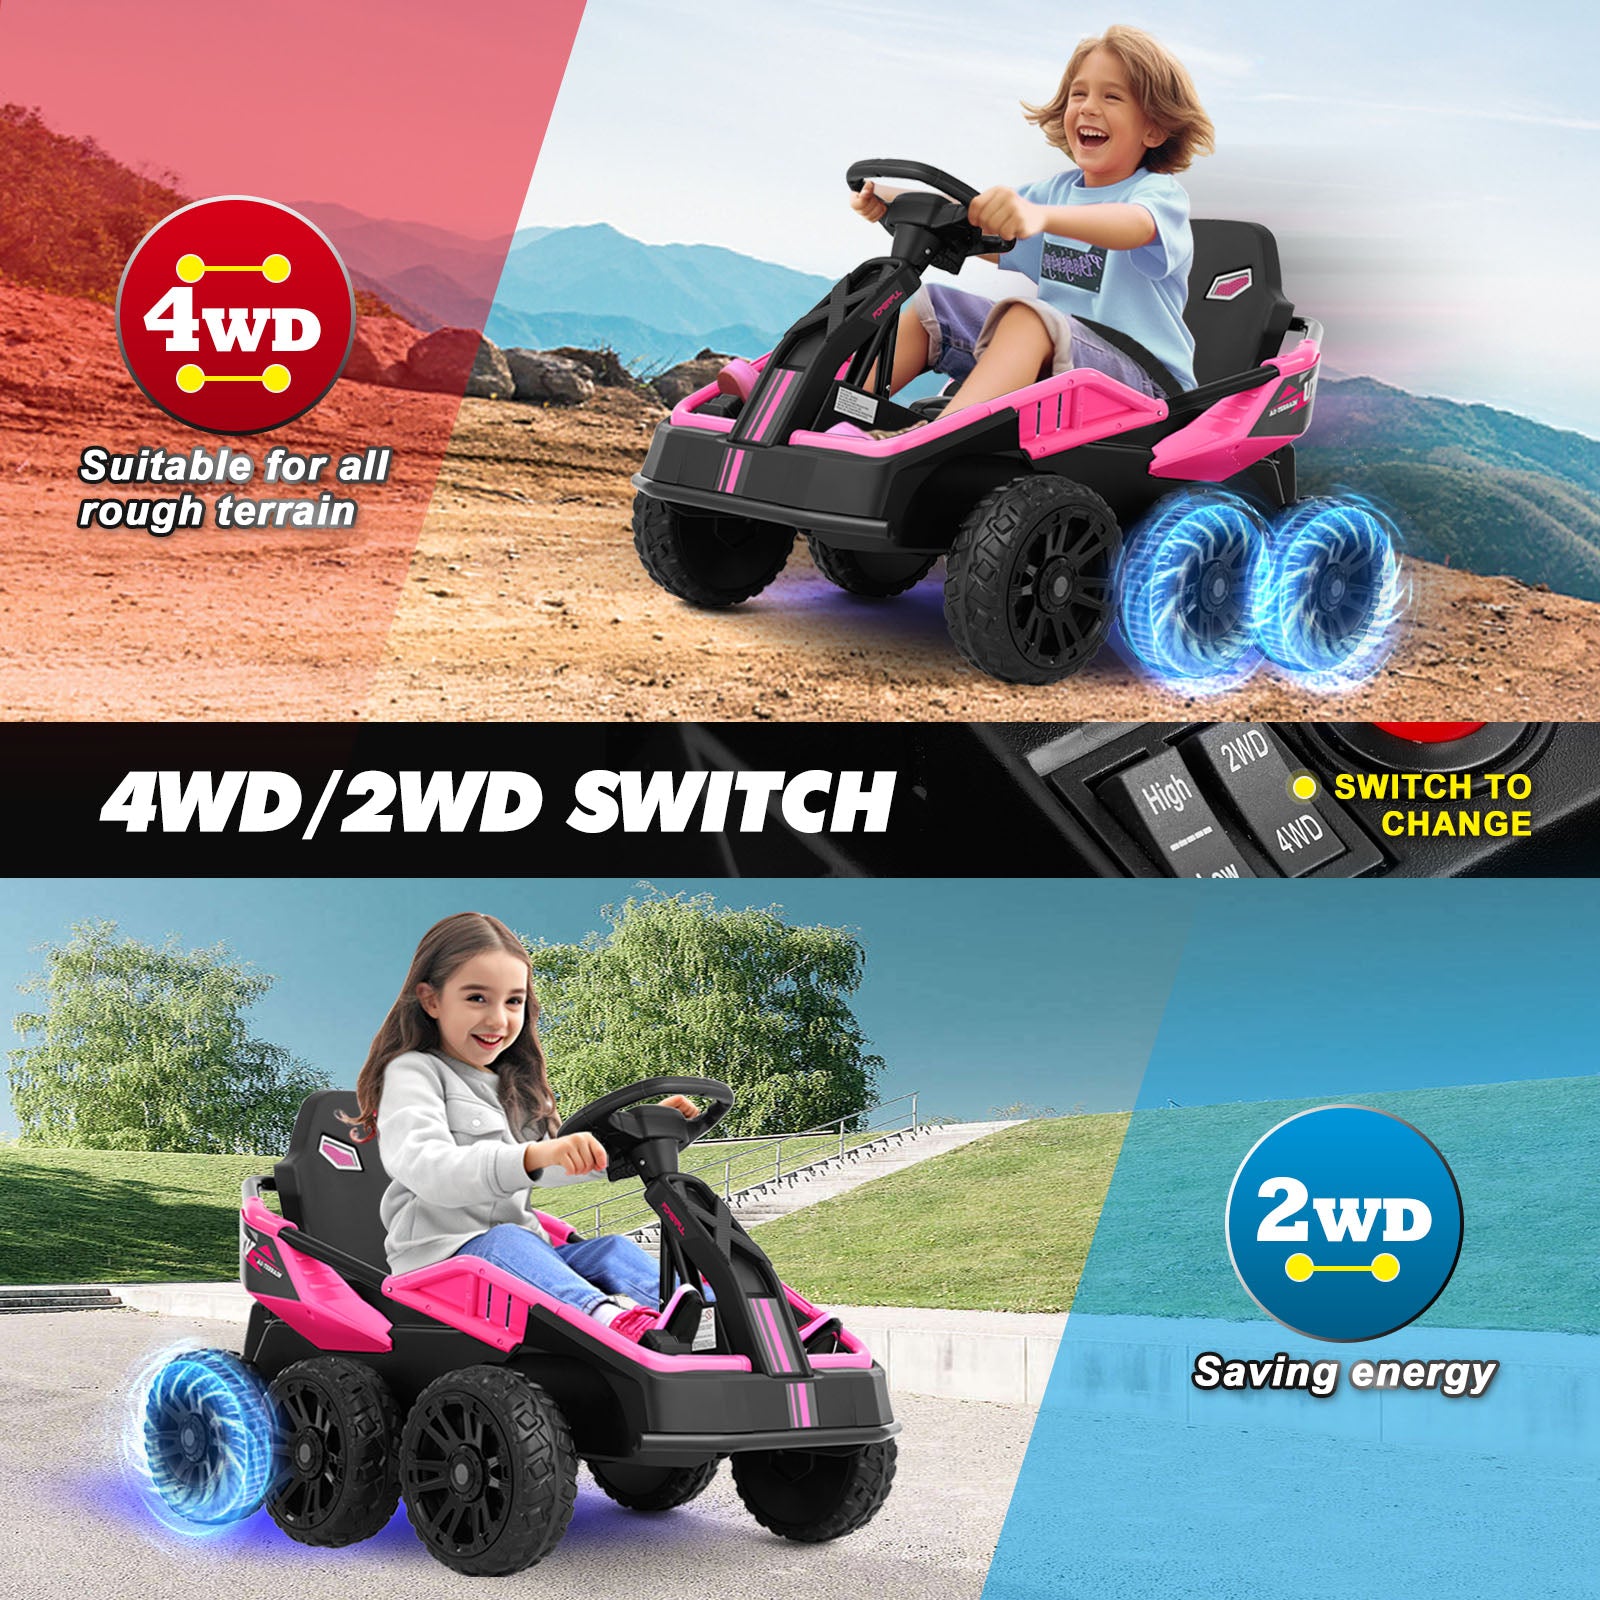 #1162  6x6 Ride On Truck for Big Kids, 4WD/2WD Switchable Kids UTV, 24V Toy Car for 2 Kids, 6-Wheeler W/4x75w Engines, 2.4G Remote Control, Music,MP4, Bluetooth, Lights, Spring Suspension